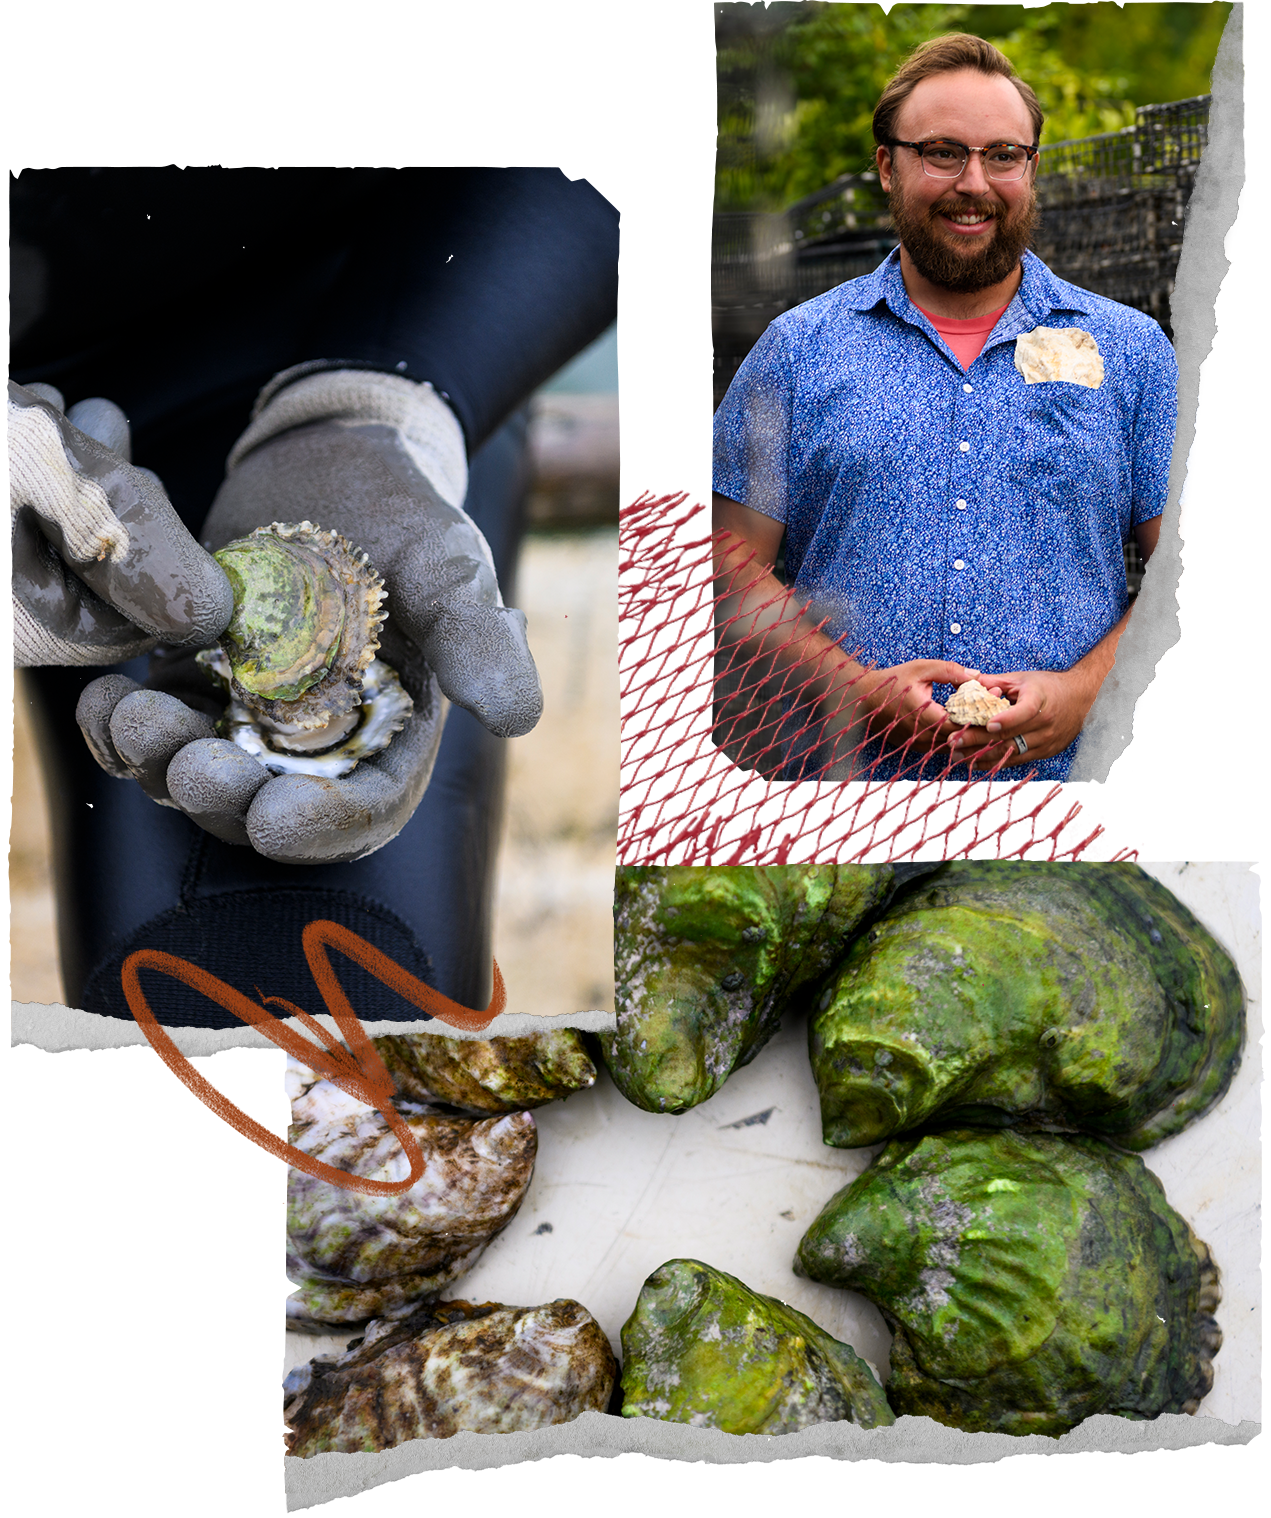 Collage of Burns holding and shucking a Nonesuch emerald and a close-up of their green shells.